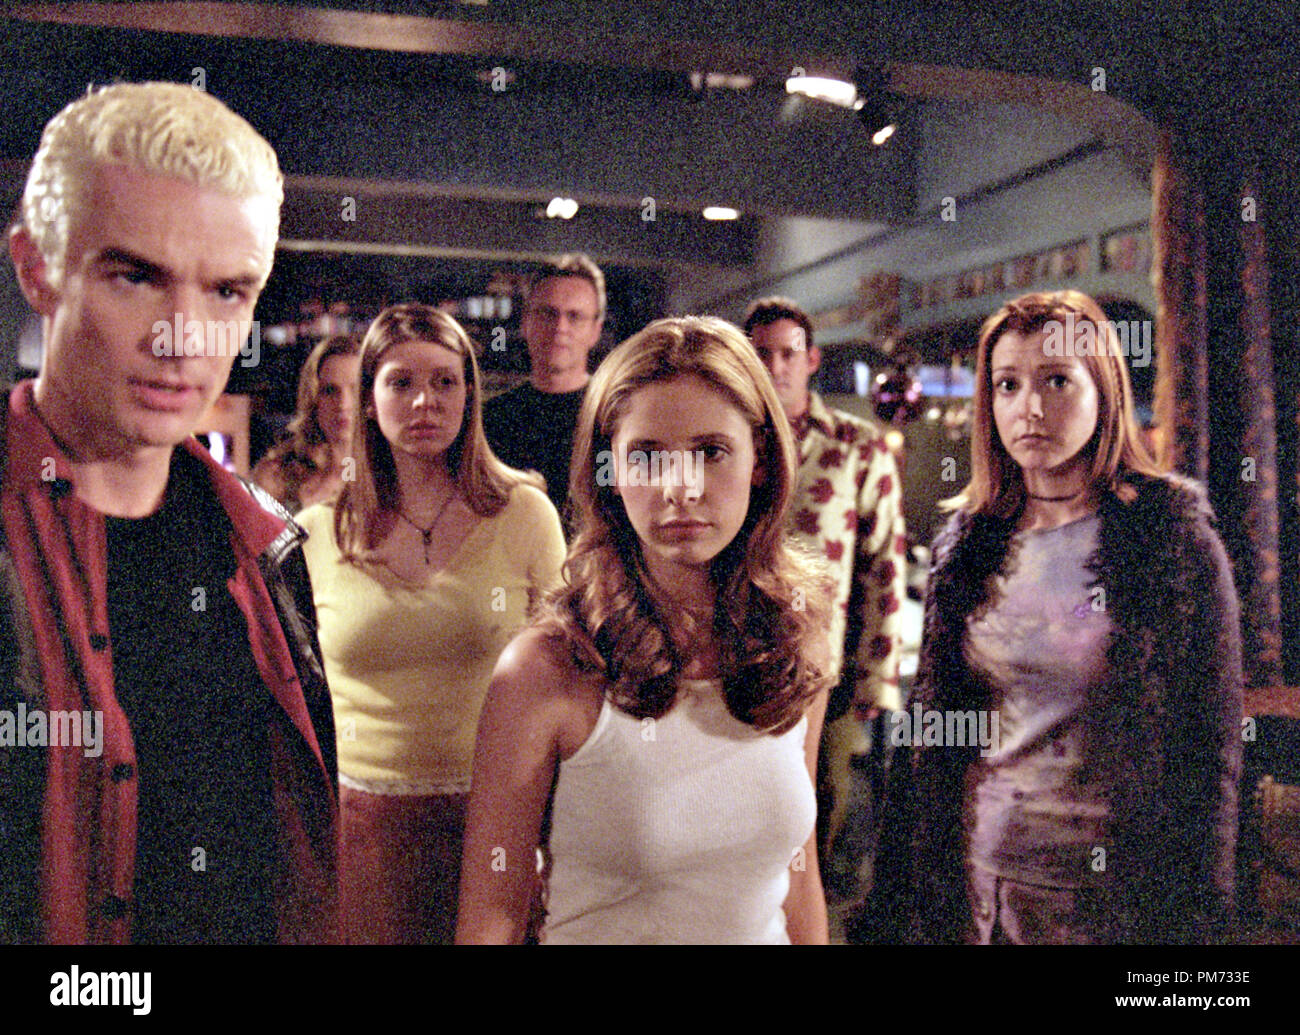 Film Still / Publicity Still from 'Buffy The Vampire Slayer' James Marsters, Sarah Michelle Gellar, Alyson Hannigan 2001 File Reference # 308471303THA  For Editorial Use Only -  All Rights Reserved Stock Photo